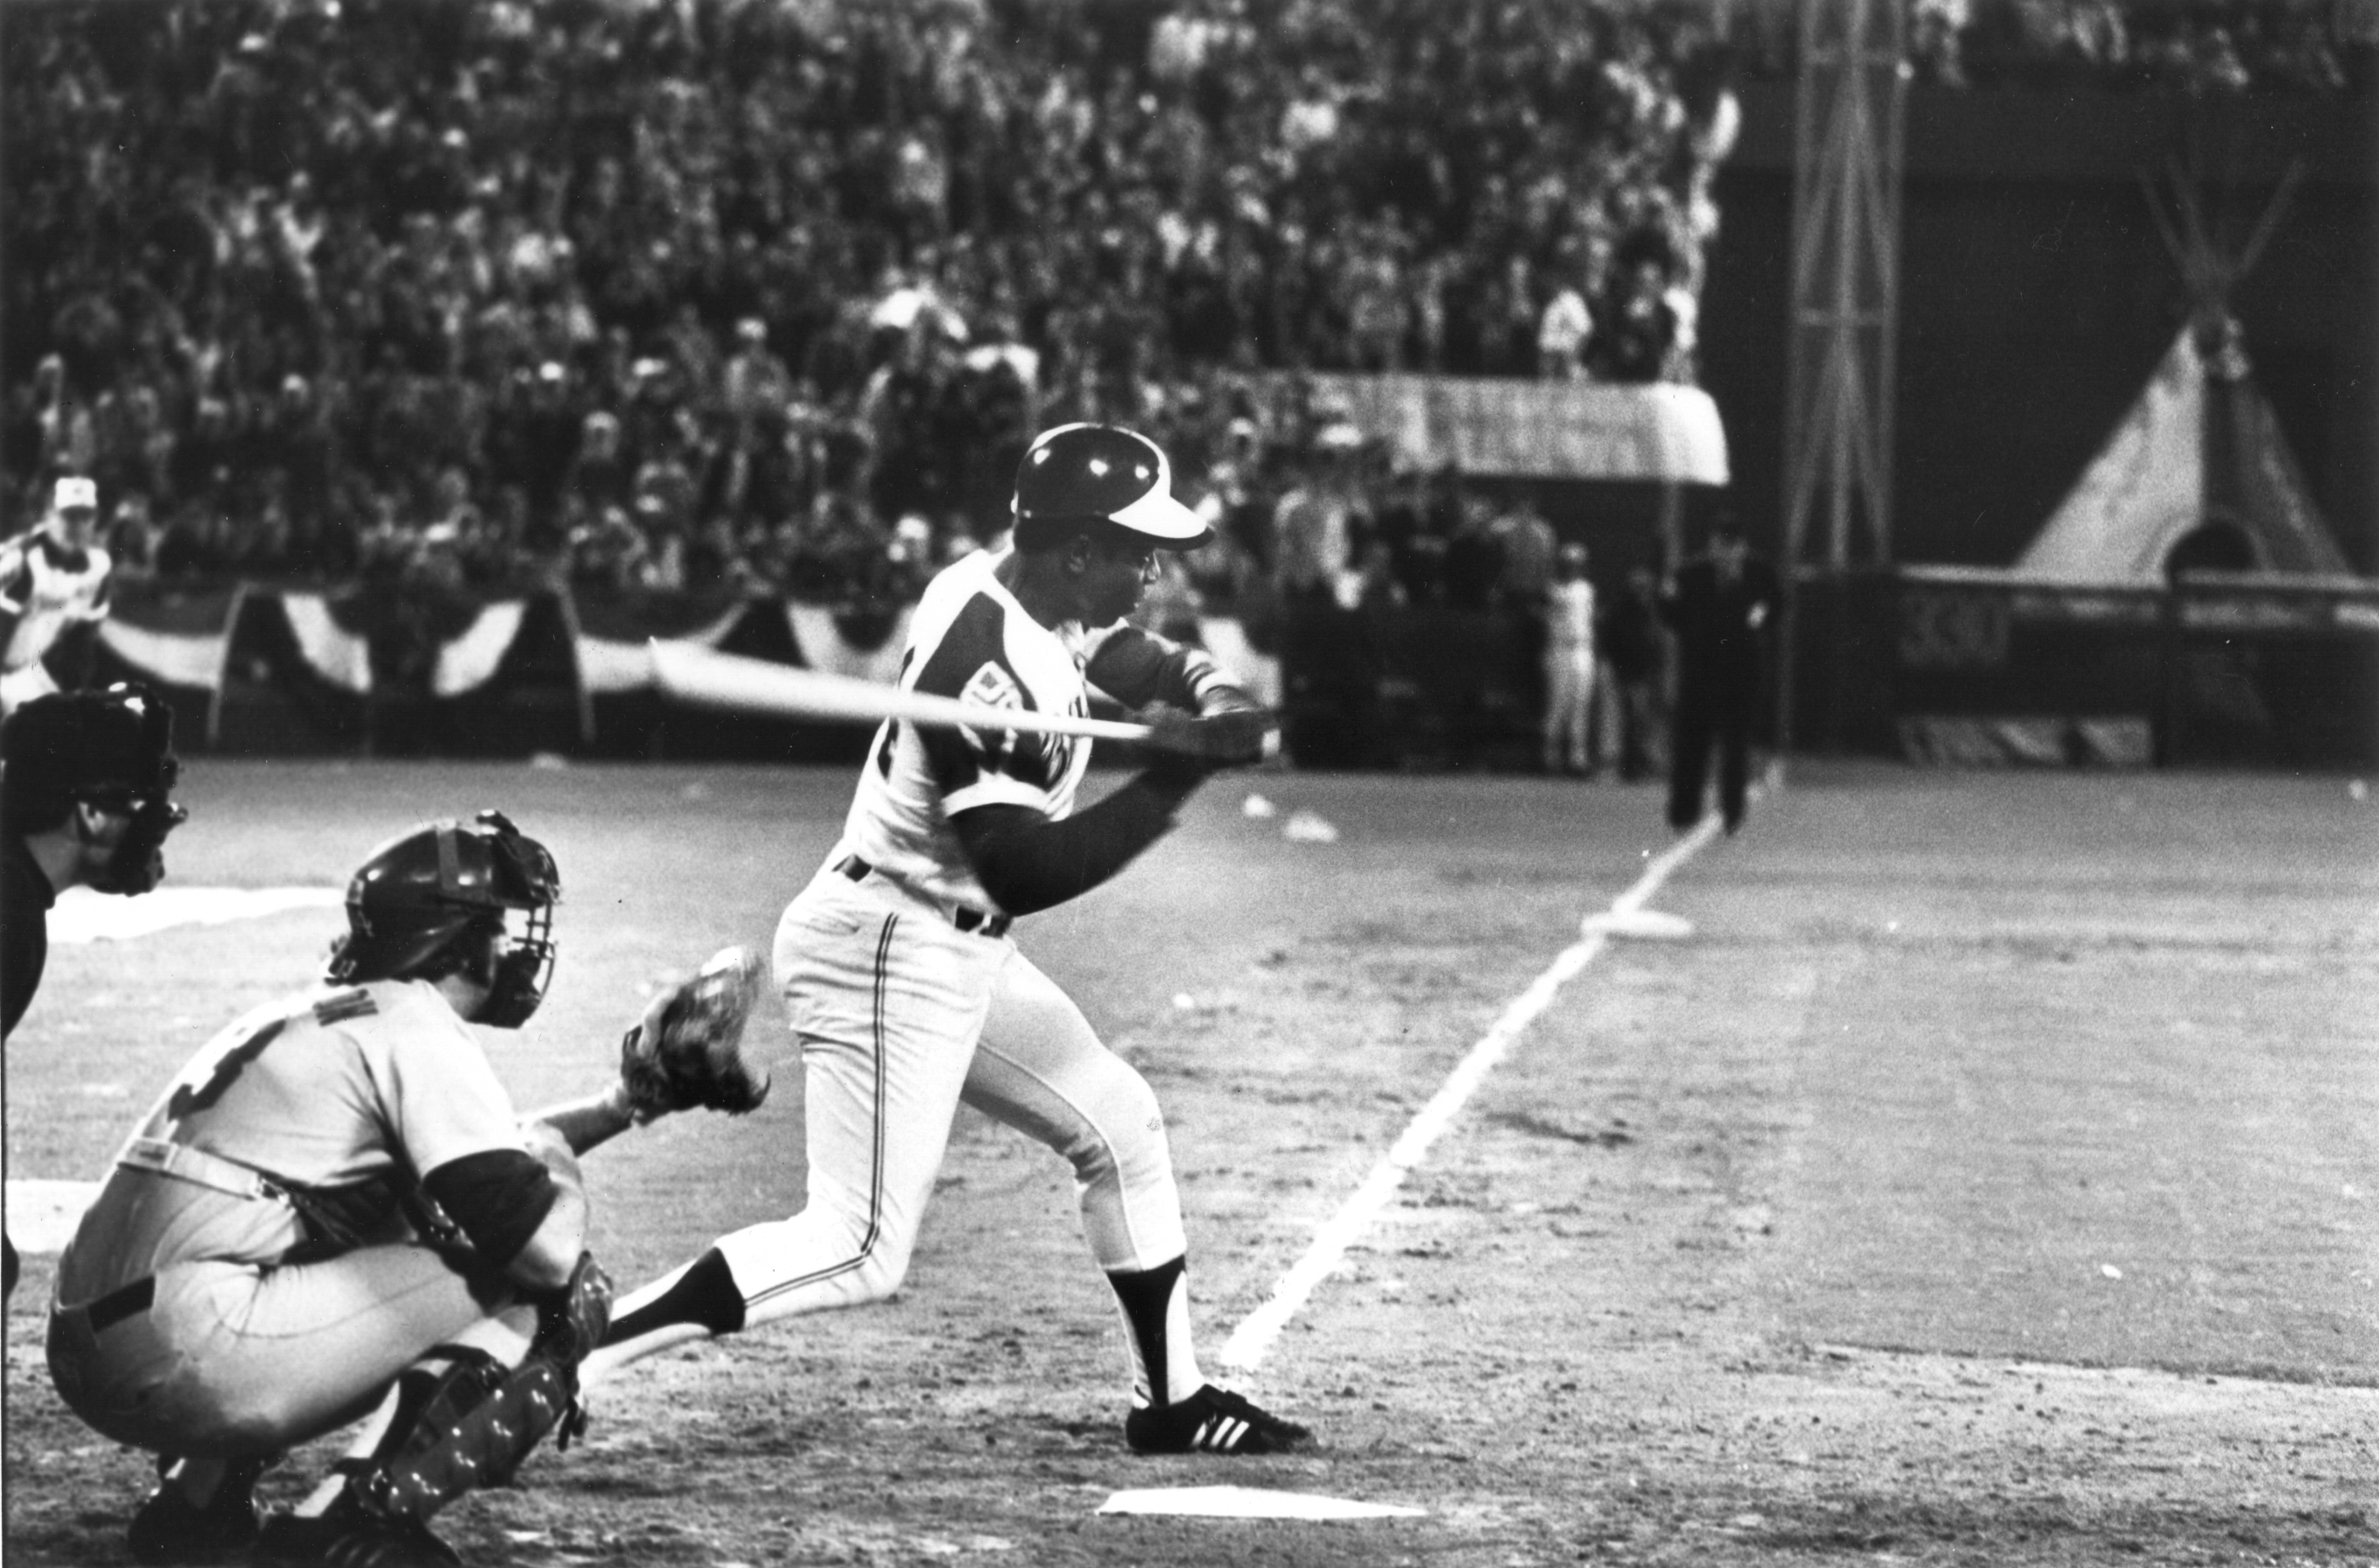 Remembering 715: Forty years ago, Hank Aaron rocked bias and hatred with  one mighty blow – New York Daily News